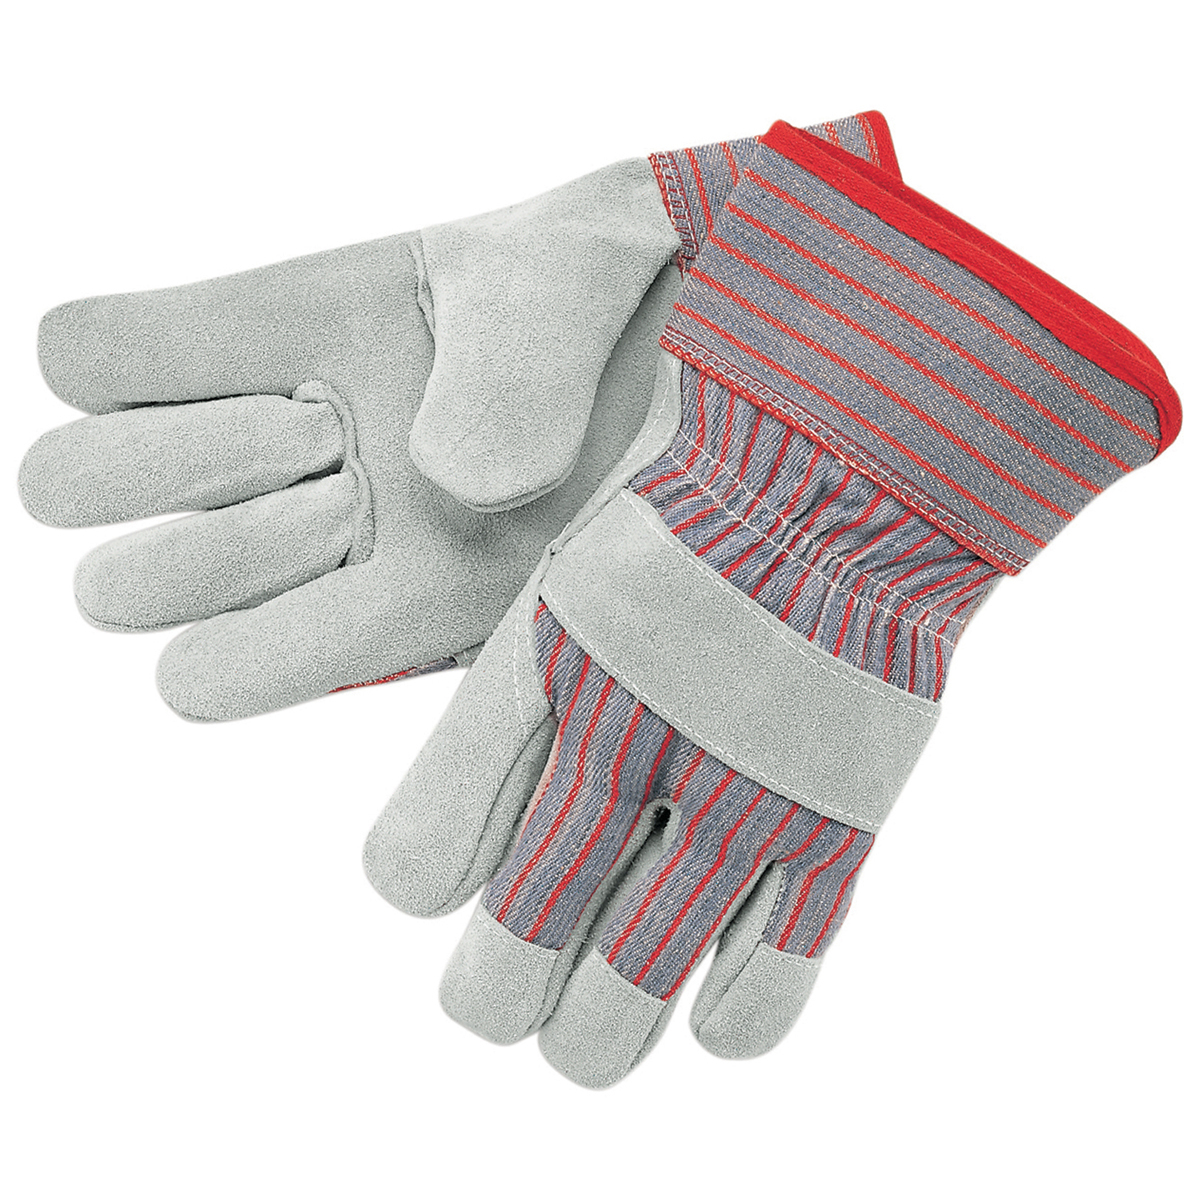 MCR Safety Large Red Industrial Grade Shoulder Split Leather Palm Gloves With Fabric Back And Rubberized Safety Cuff